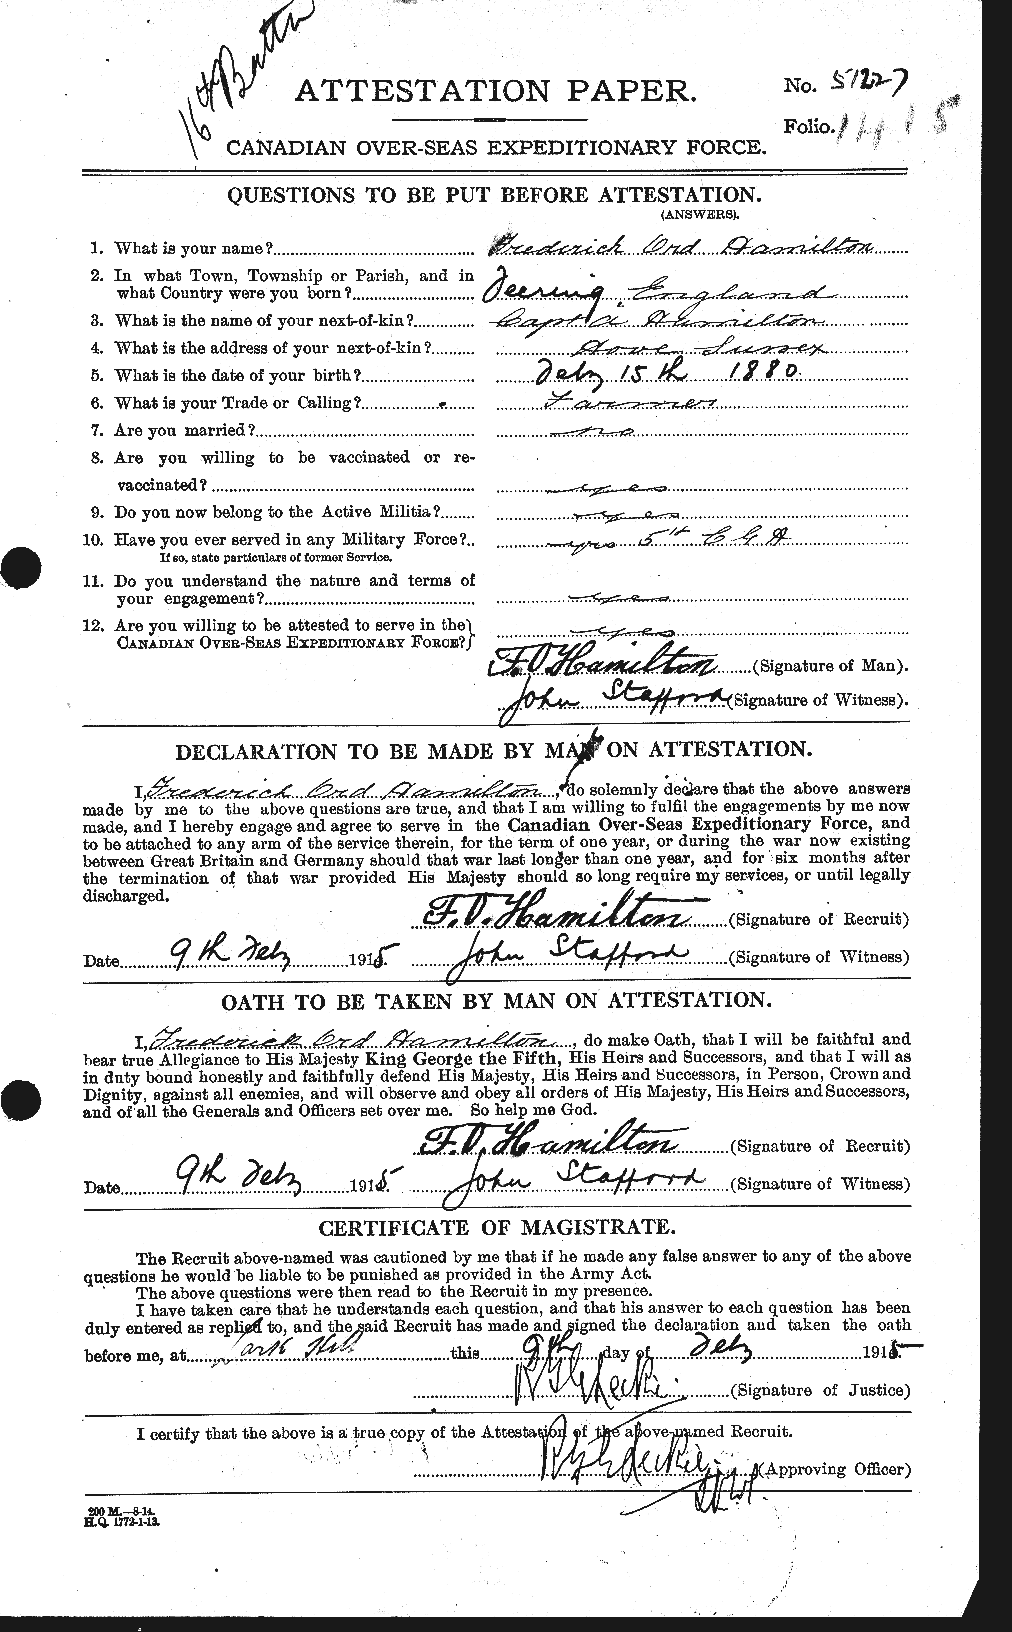 Personnel Records of the First World War - CEF 372413a